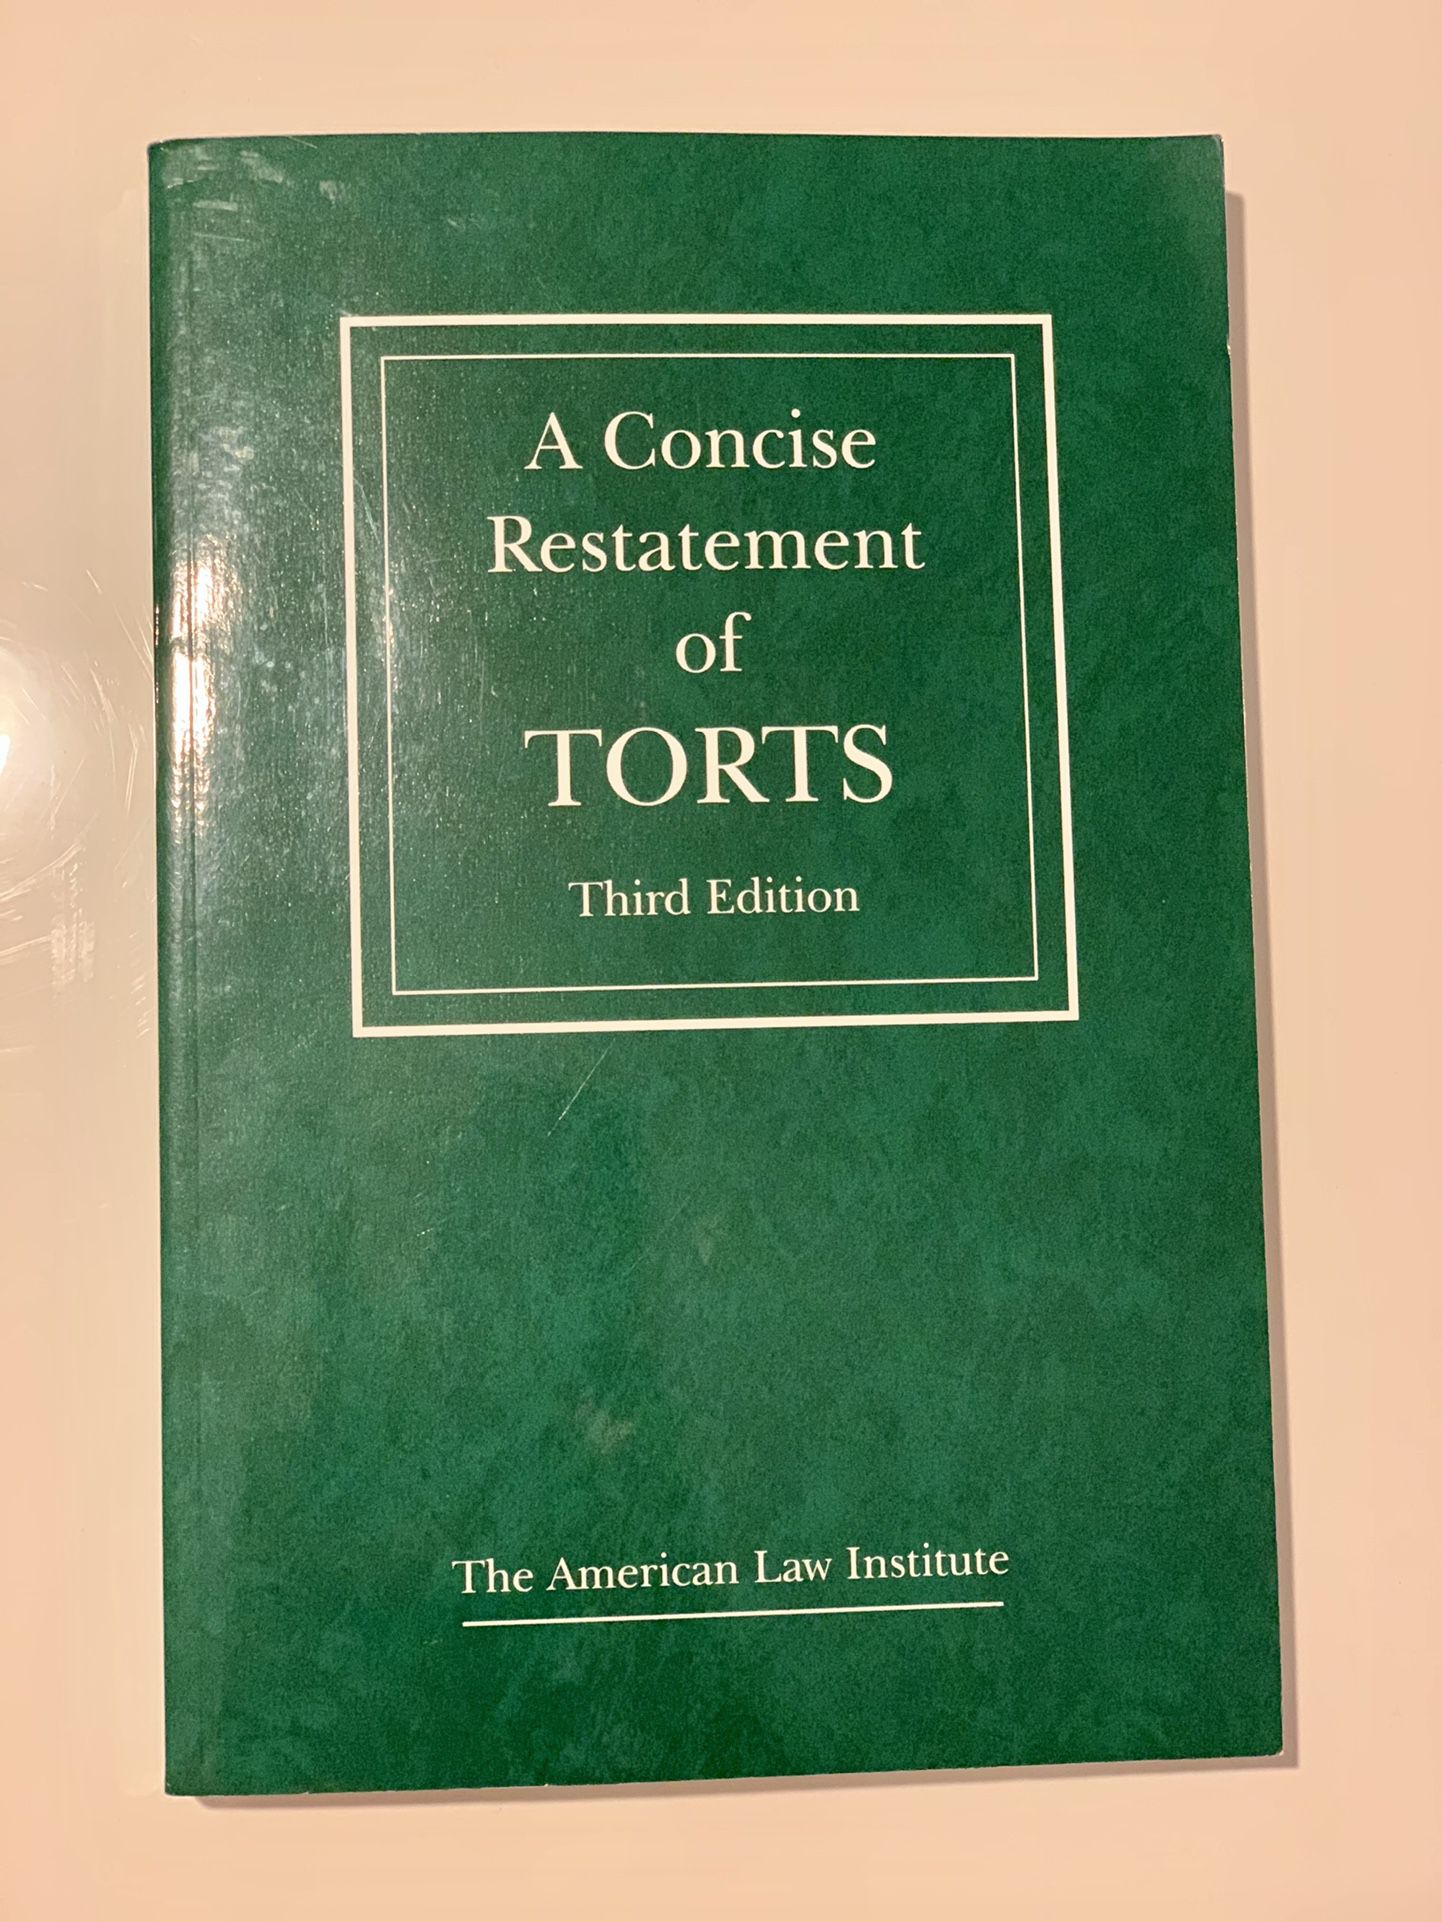 A Concise Restatement of Torts, 3d